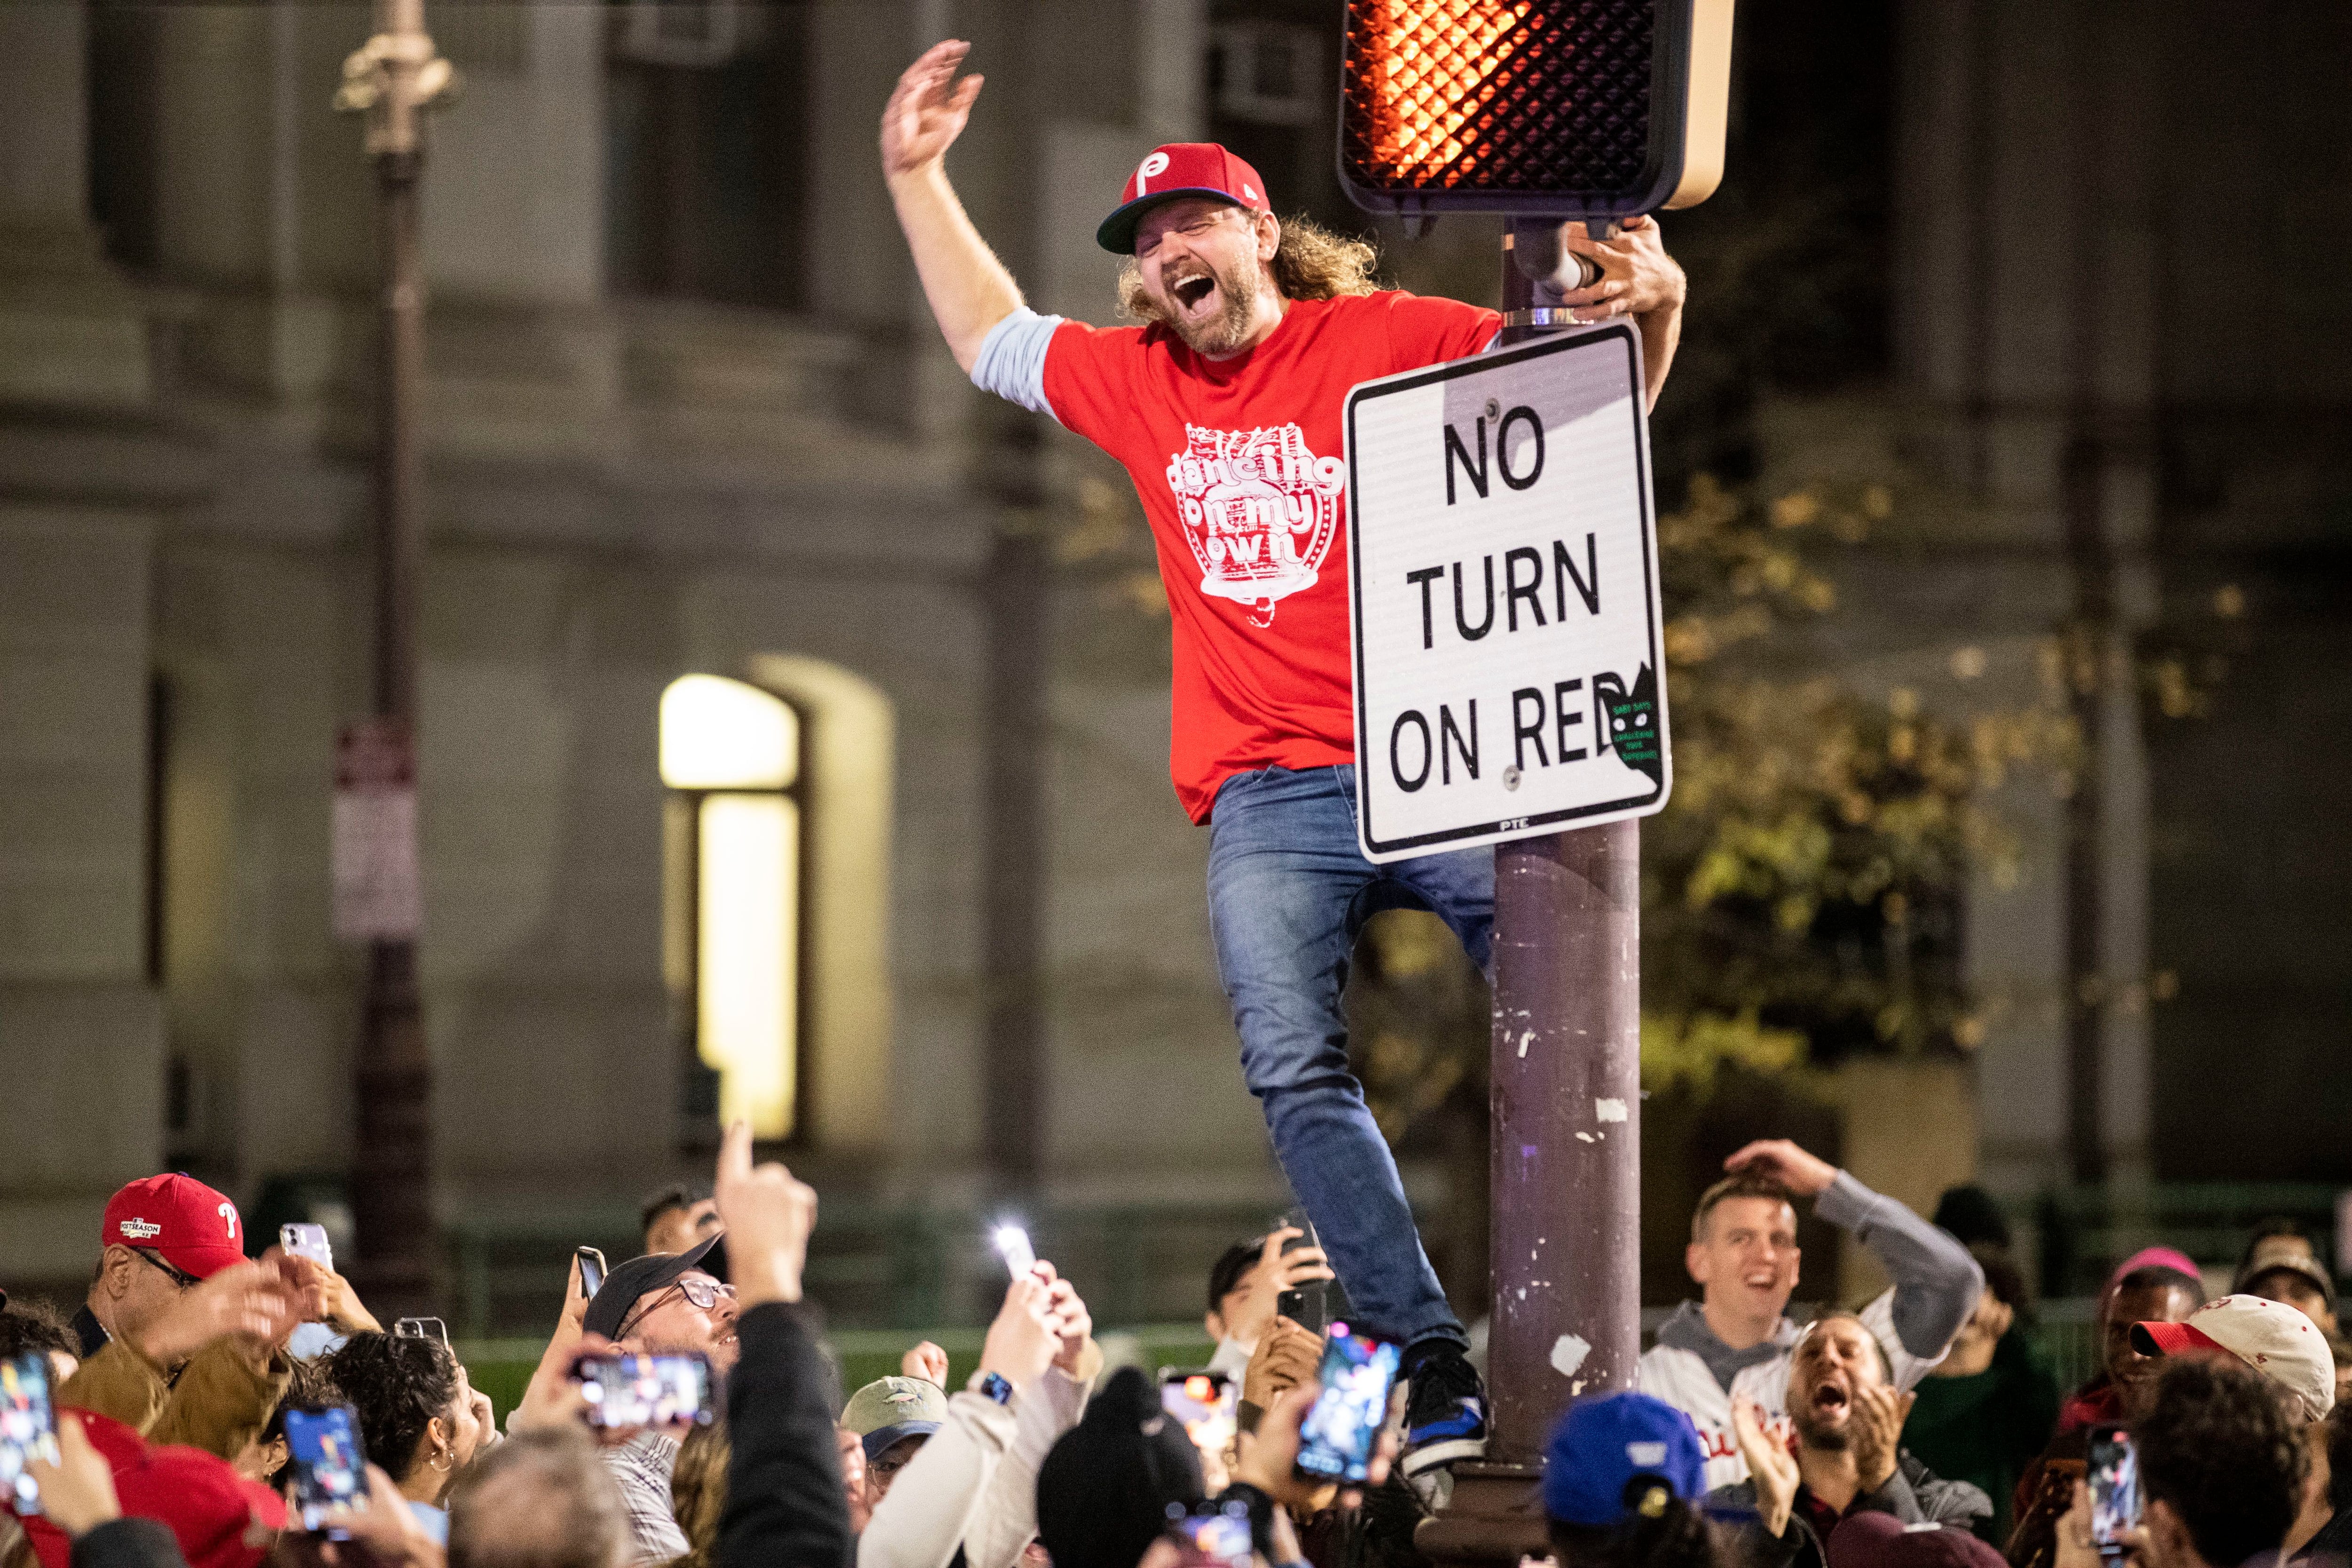 Philadelphia Phillies fans jubilant as team rallies its way back into  playoff chase: Such an exciting time to be a fan I f***g love this team